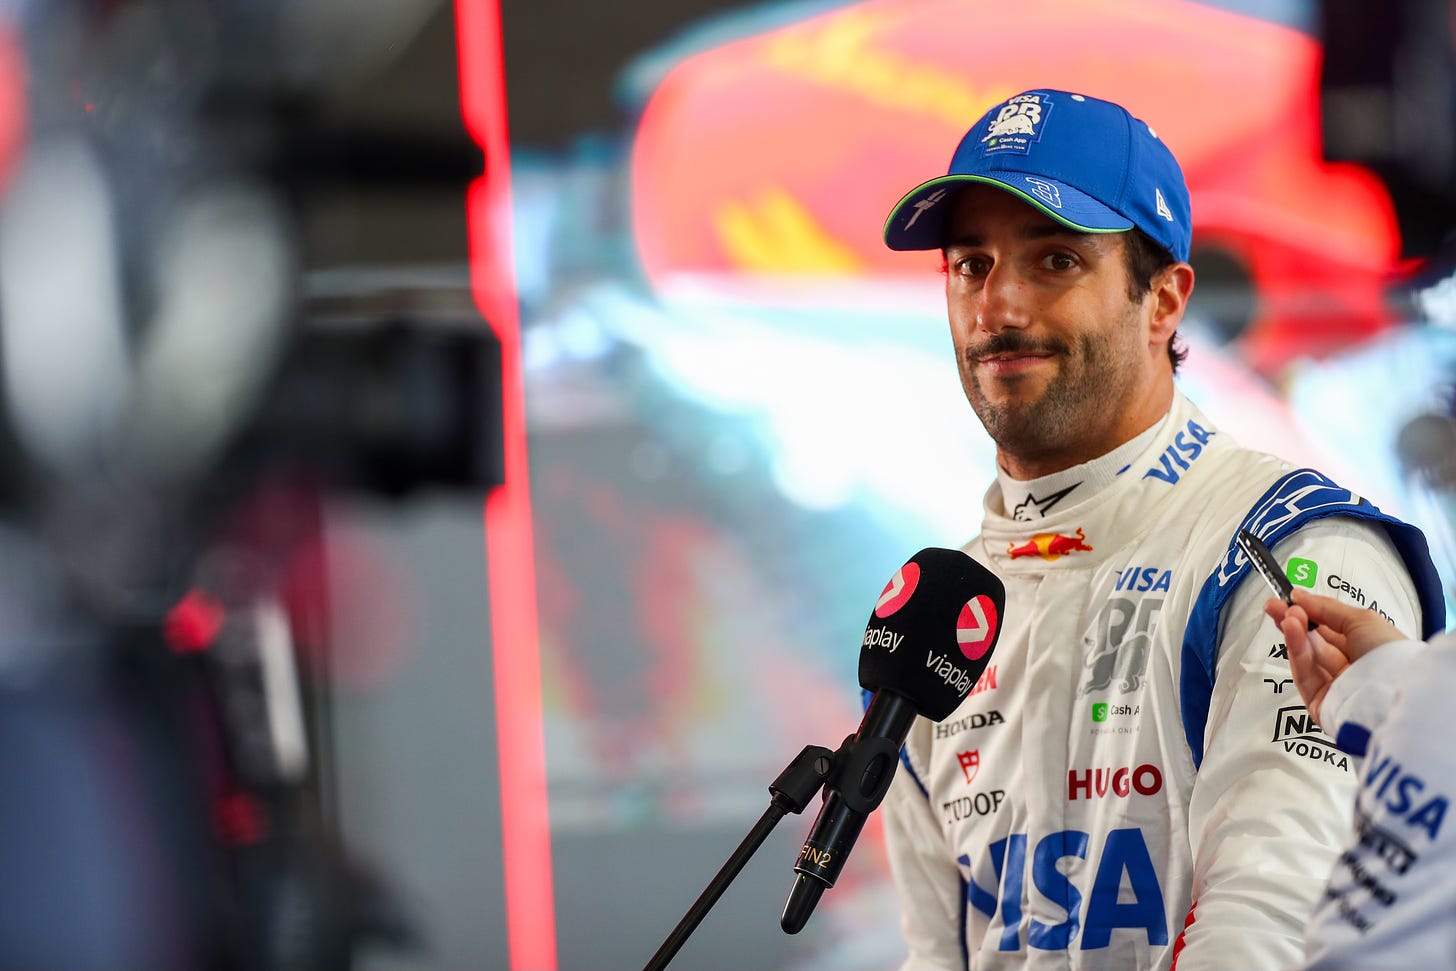 Ricciardo risks being overlooked for another Red Bull protégé